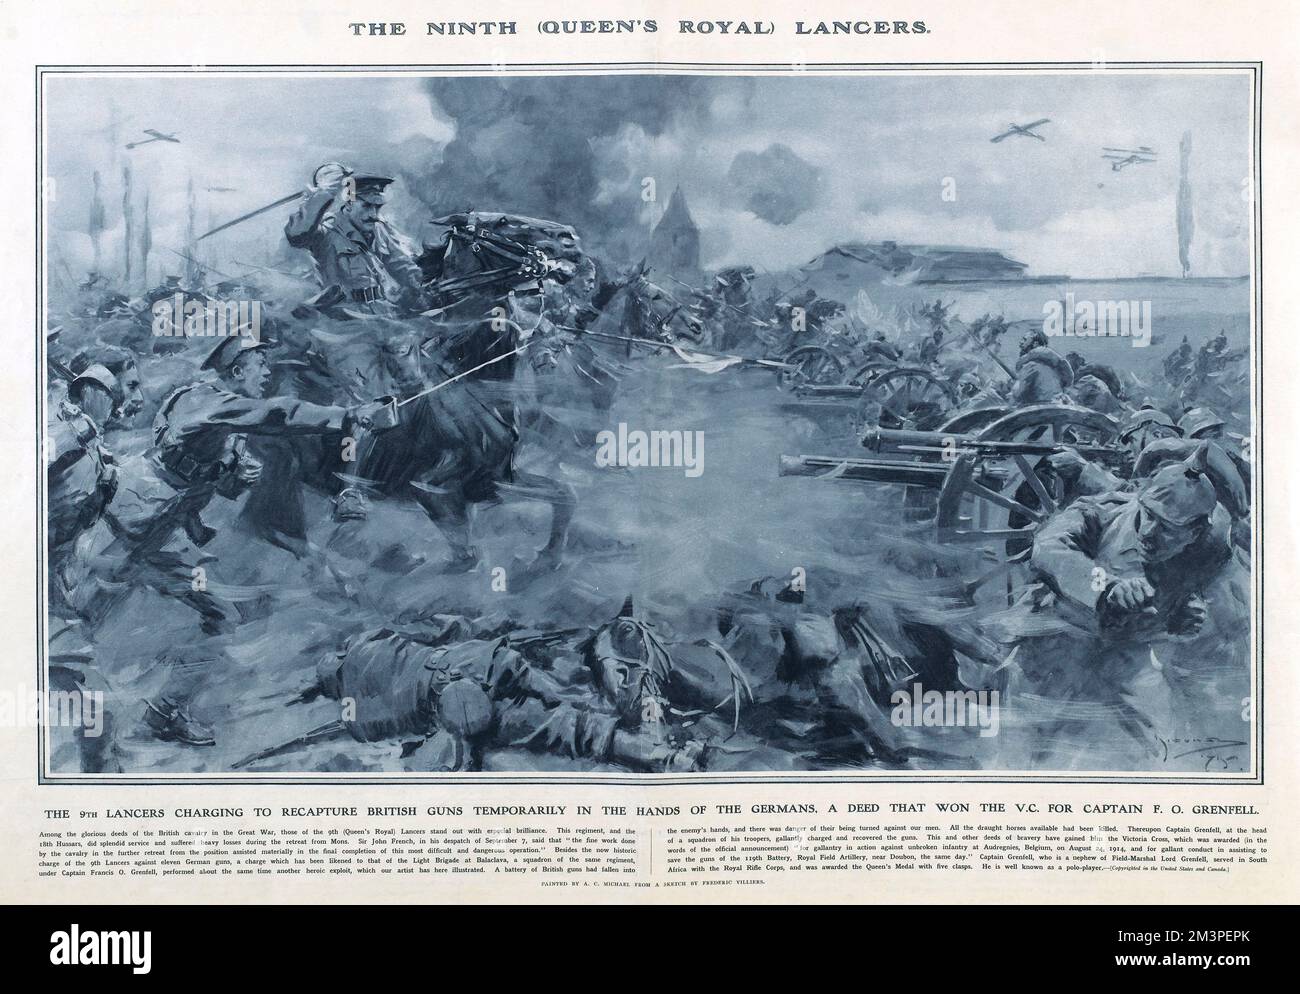 The Ninth (Queen's Royal) Lancers charging to recapture British guns temporarily in the hands of the Germans, a deed that won the Victoria Cross for Captain F O Grenfell.  Reproduction of a painting by A C Michael in Great War Deeds, a special panorama supplement produced by the Illustrated London News in 1915, featuring heroic actions of the First World War.      Date: 1914 Stock Photo